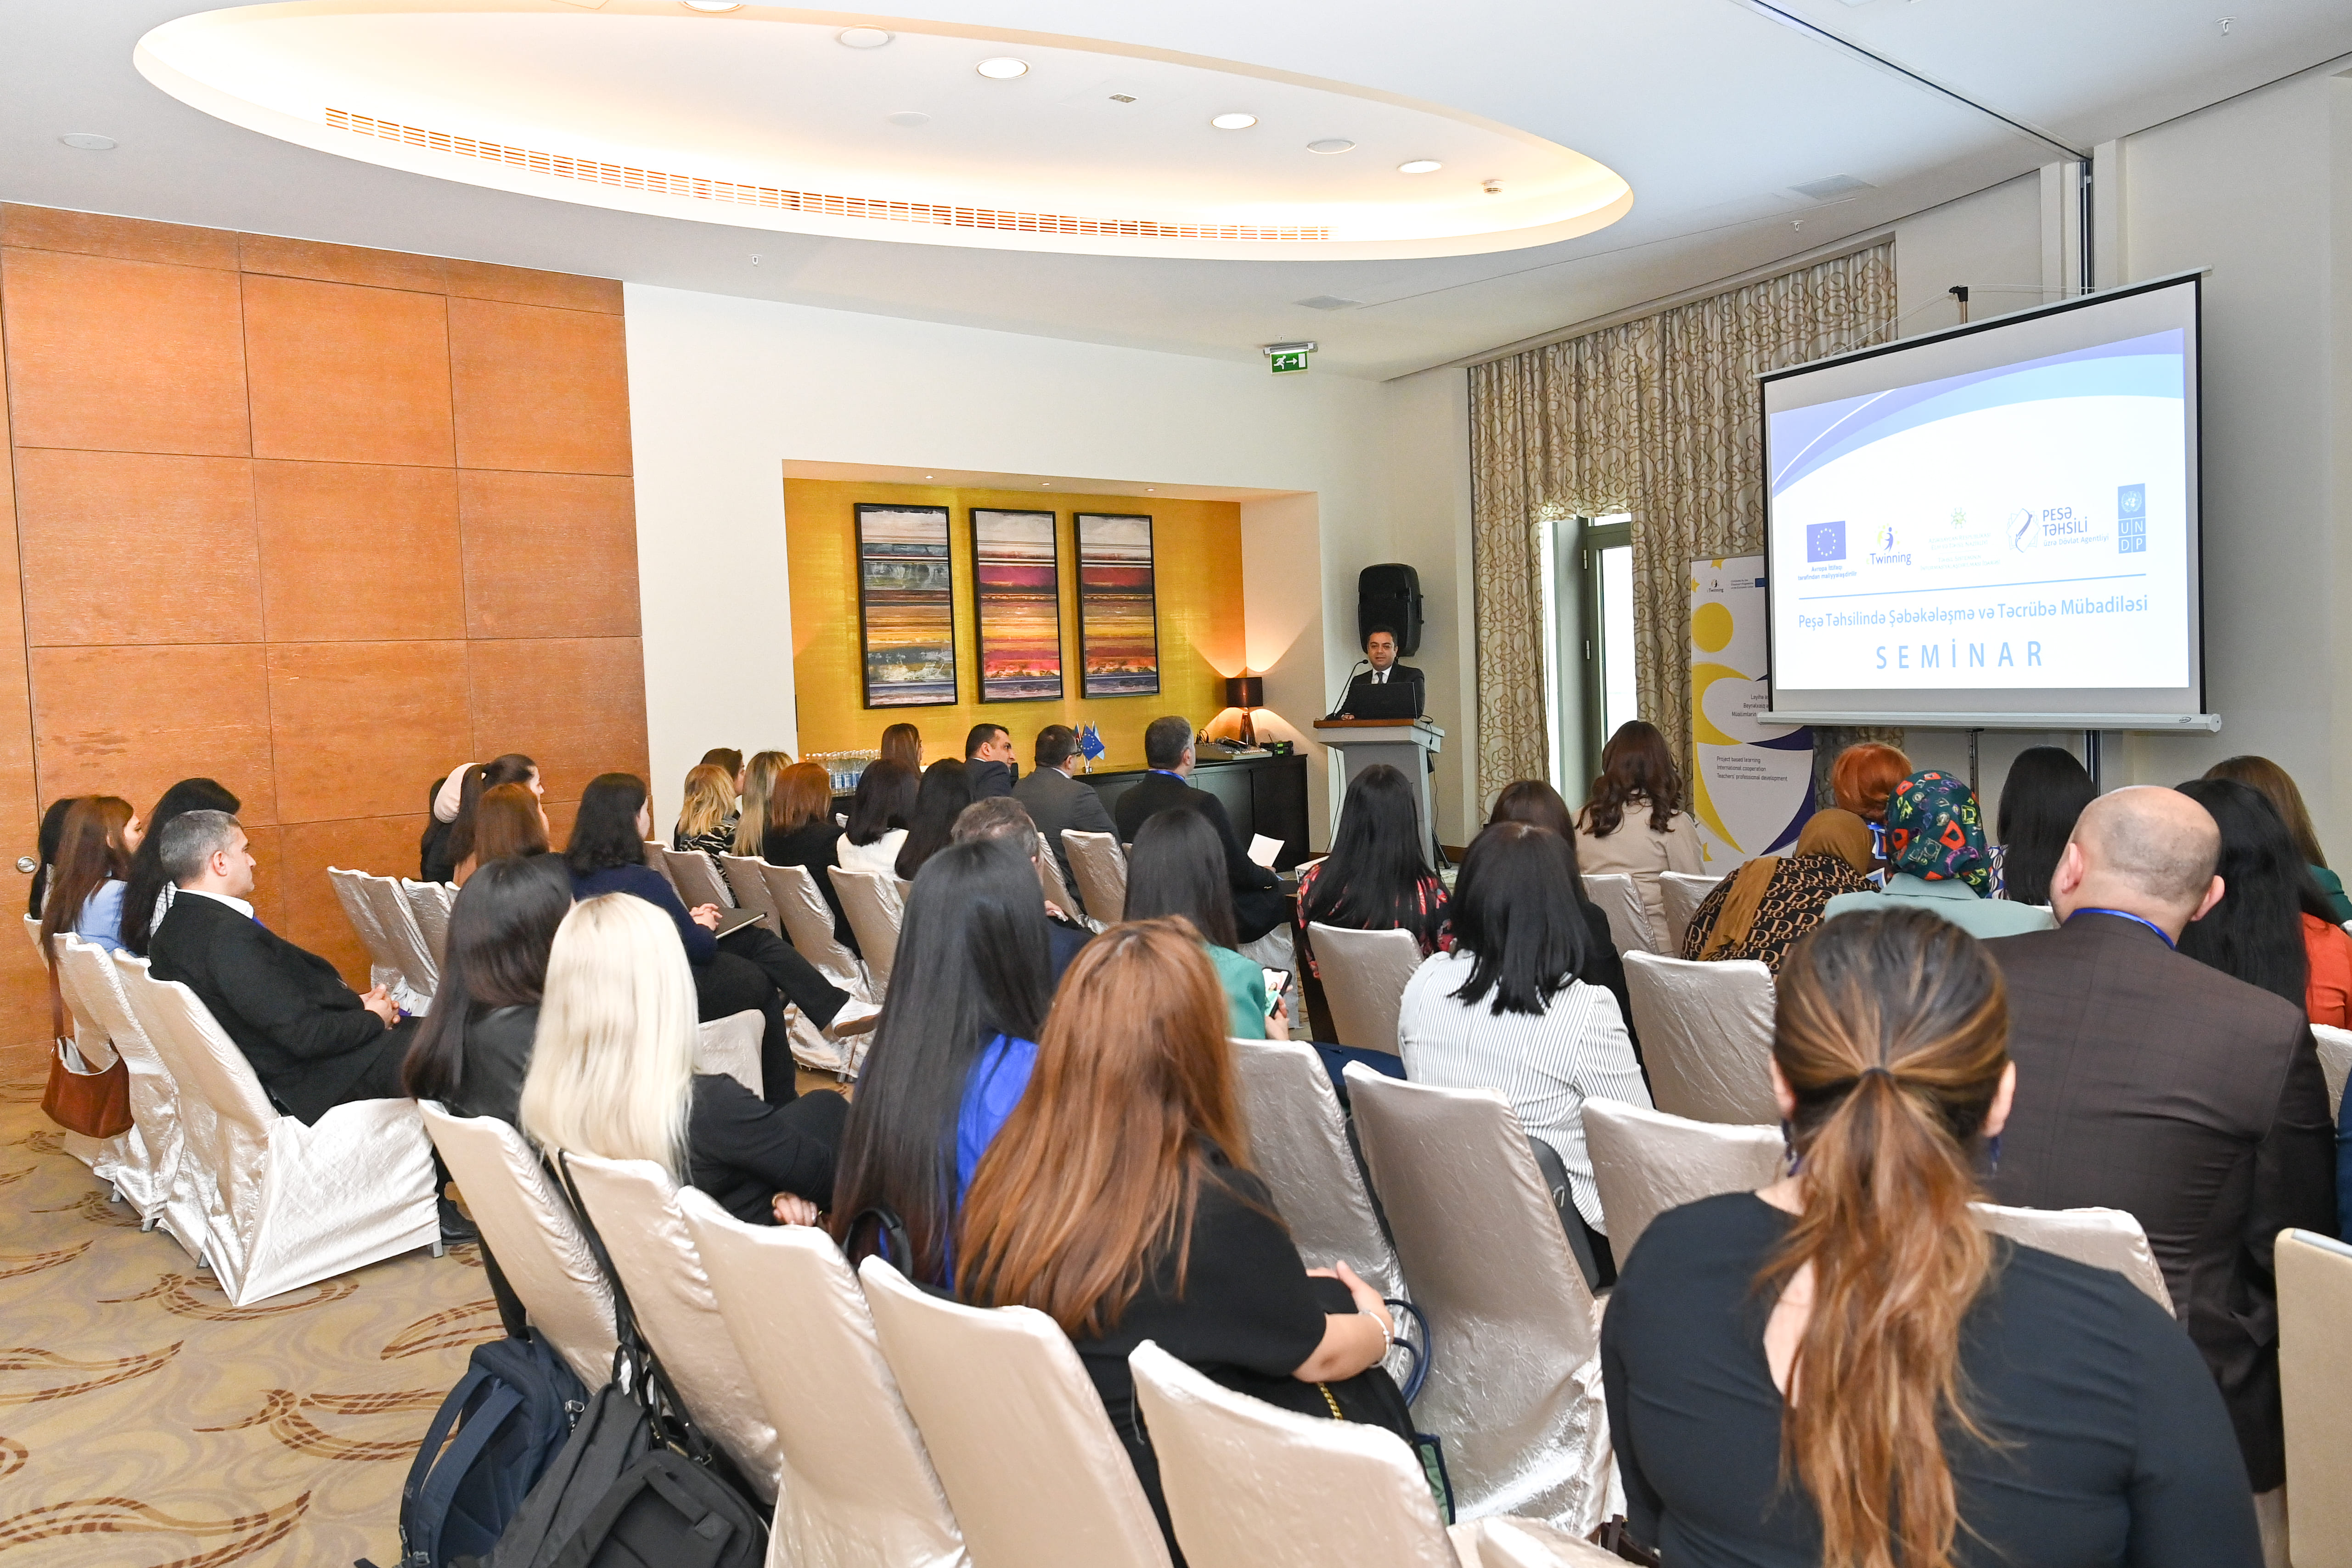 Seminar on "Networking and exchange of experience in vocational education" was held in Baku